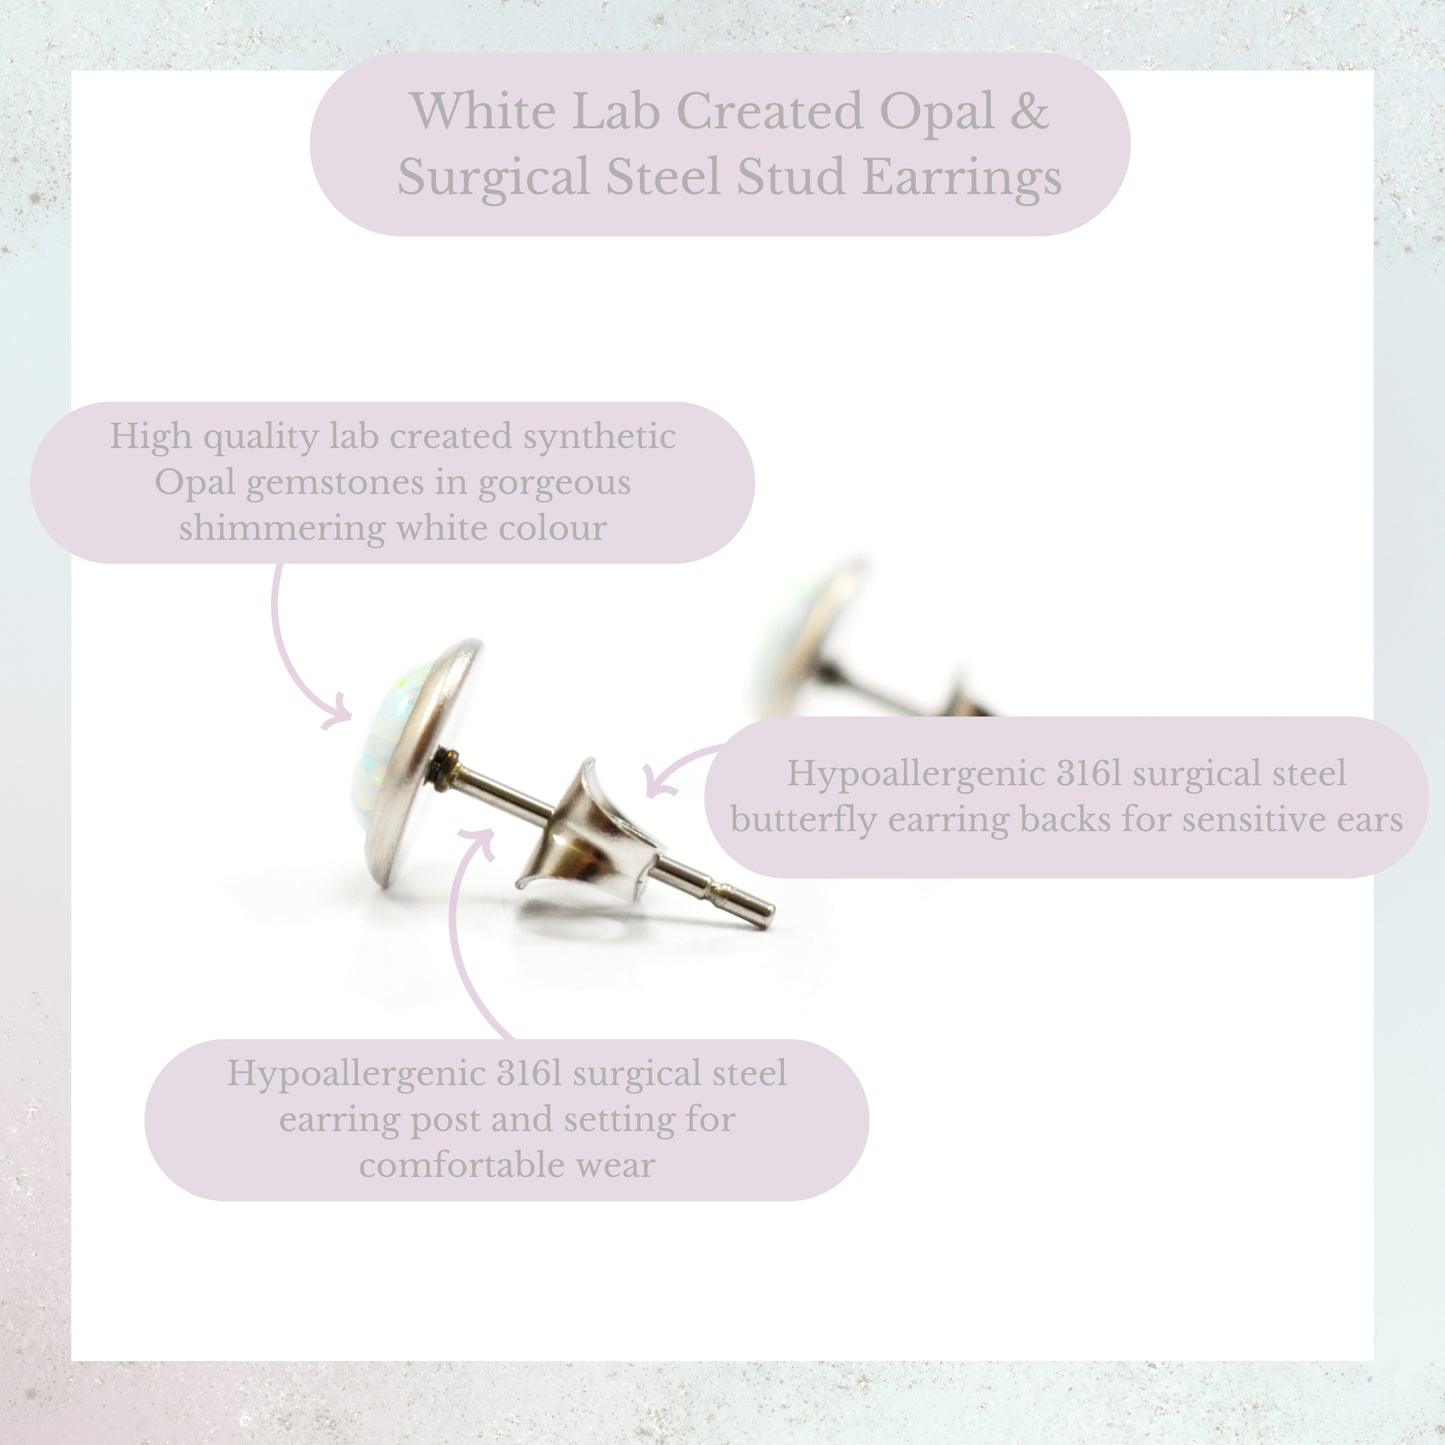 White Lab Created Opal & Surgical Steel Stud Earrings Product Information Graphic